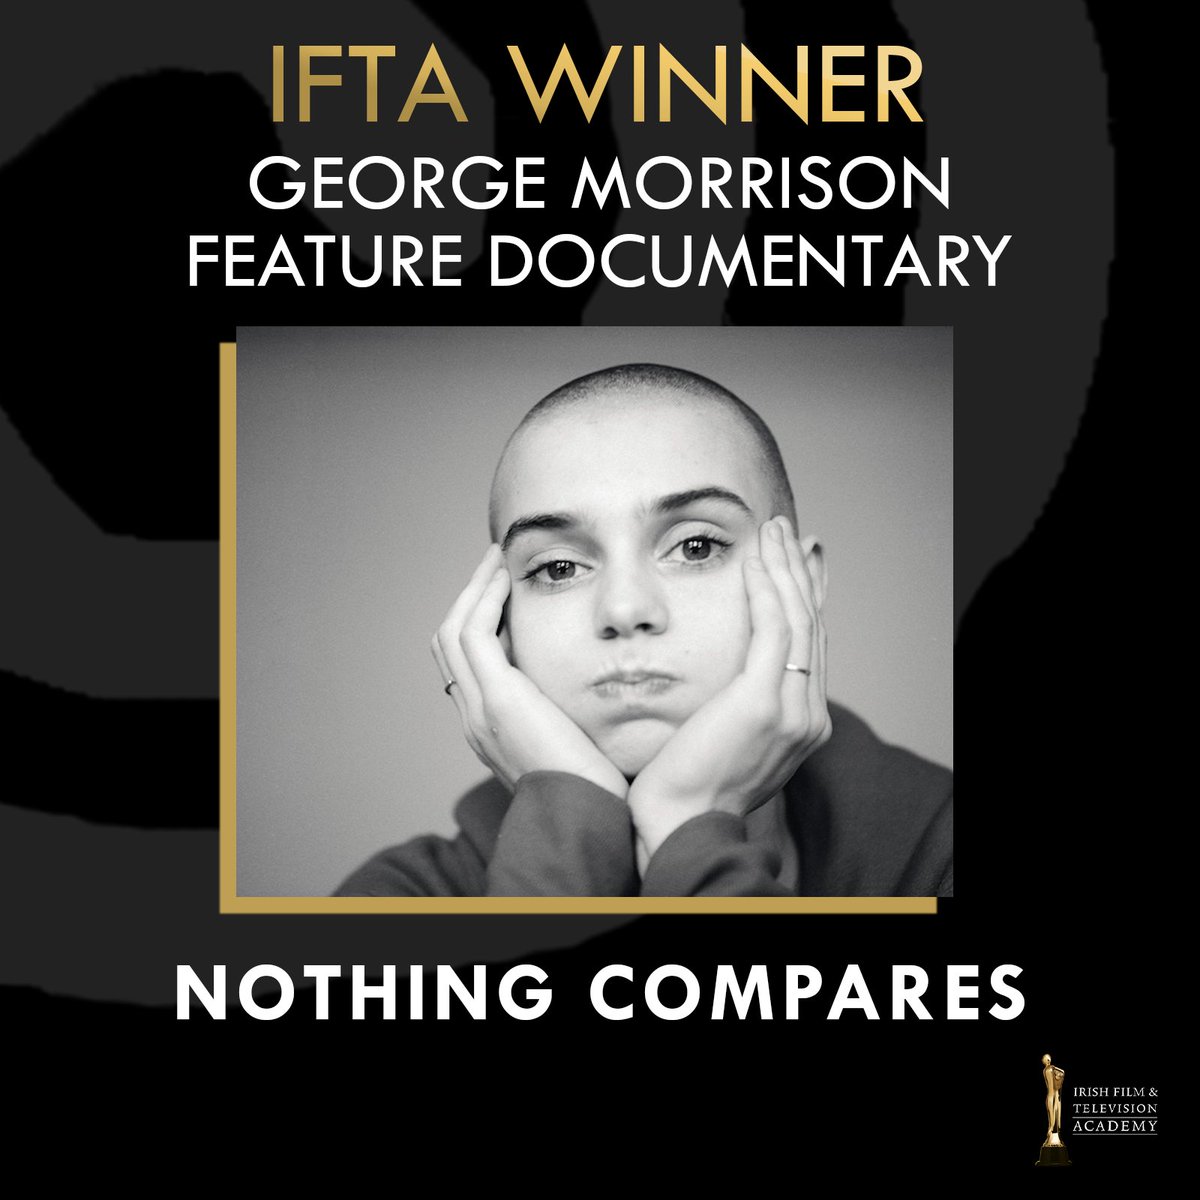 Congratulations to our winner for the George Morrison Feature Documentary Award... Nothing Compares! 

#IFTA